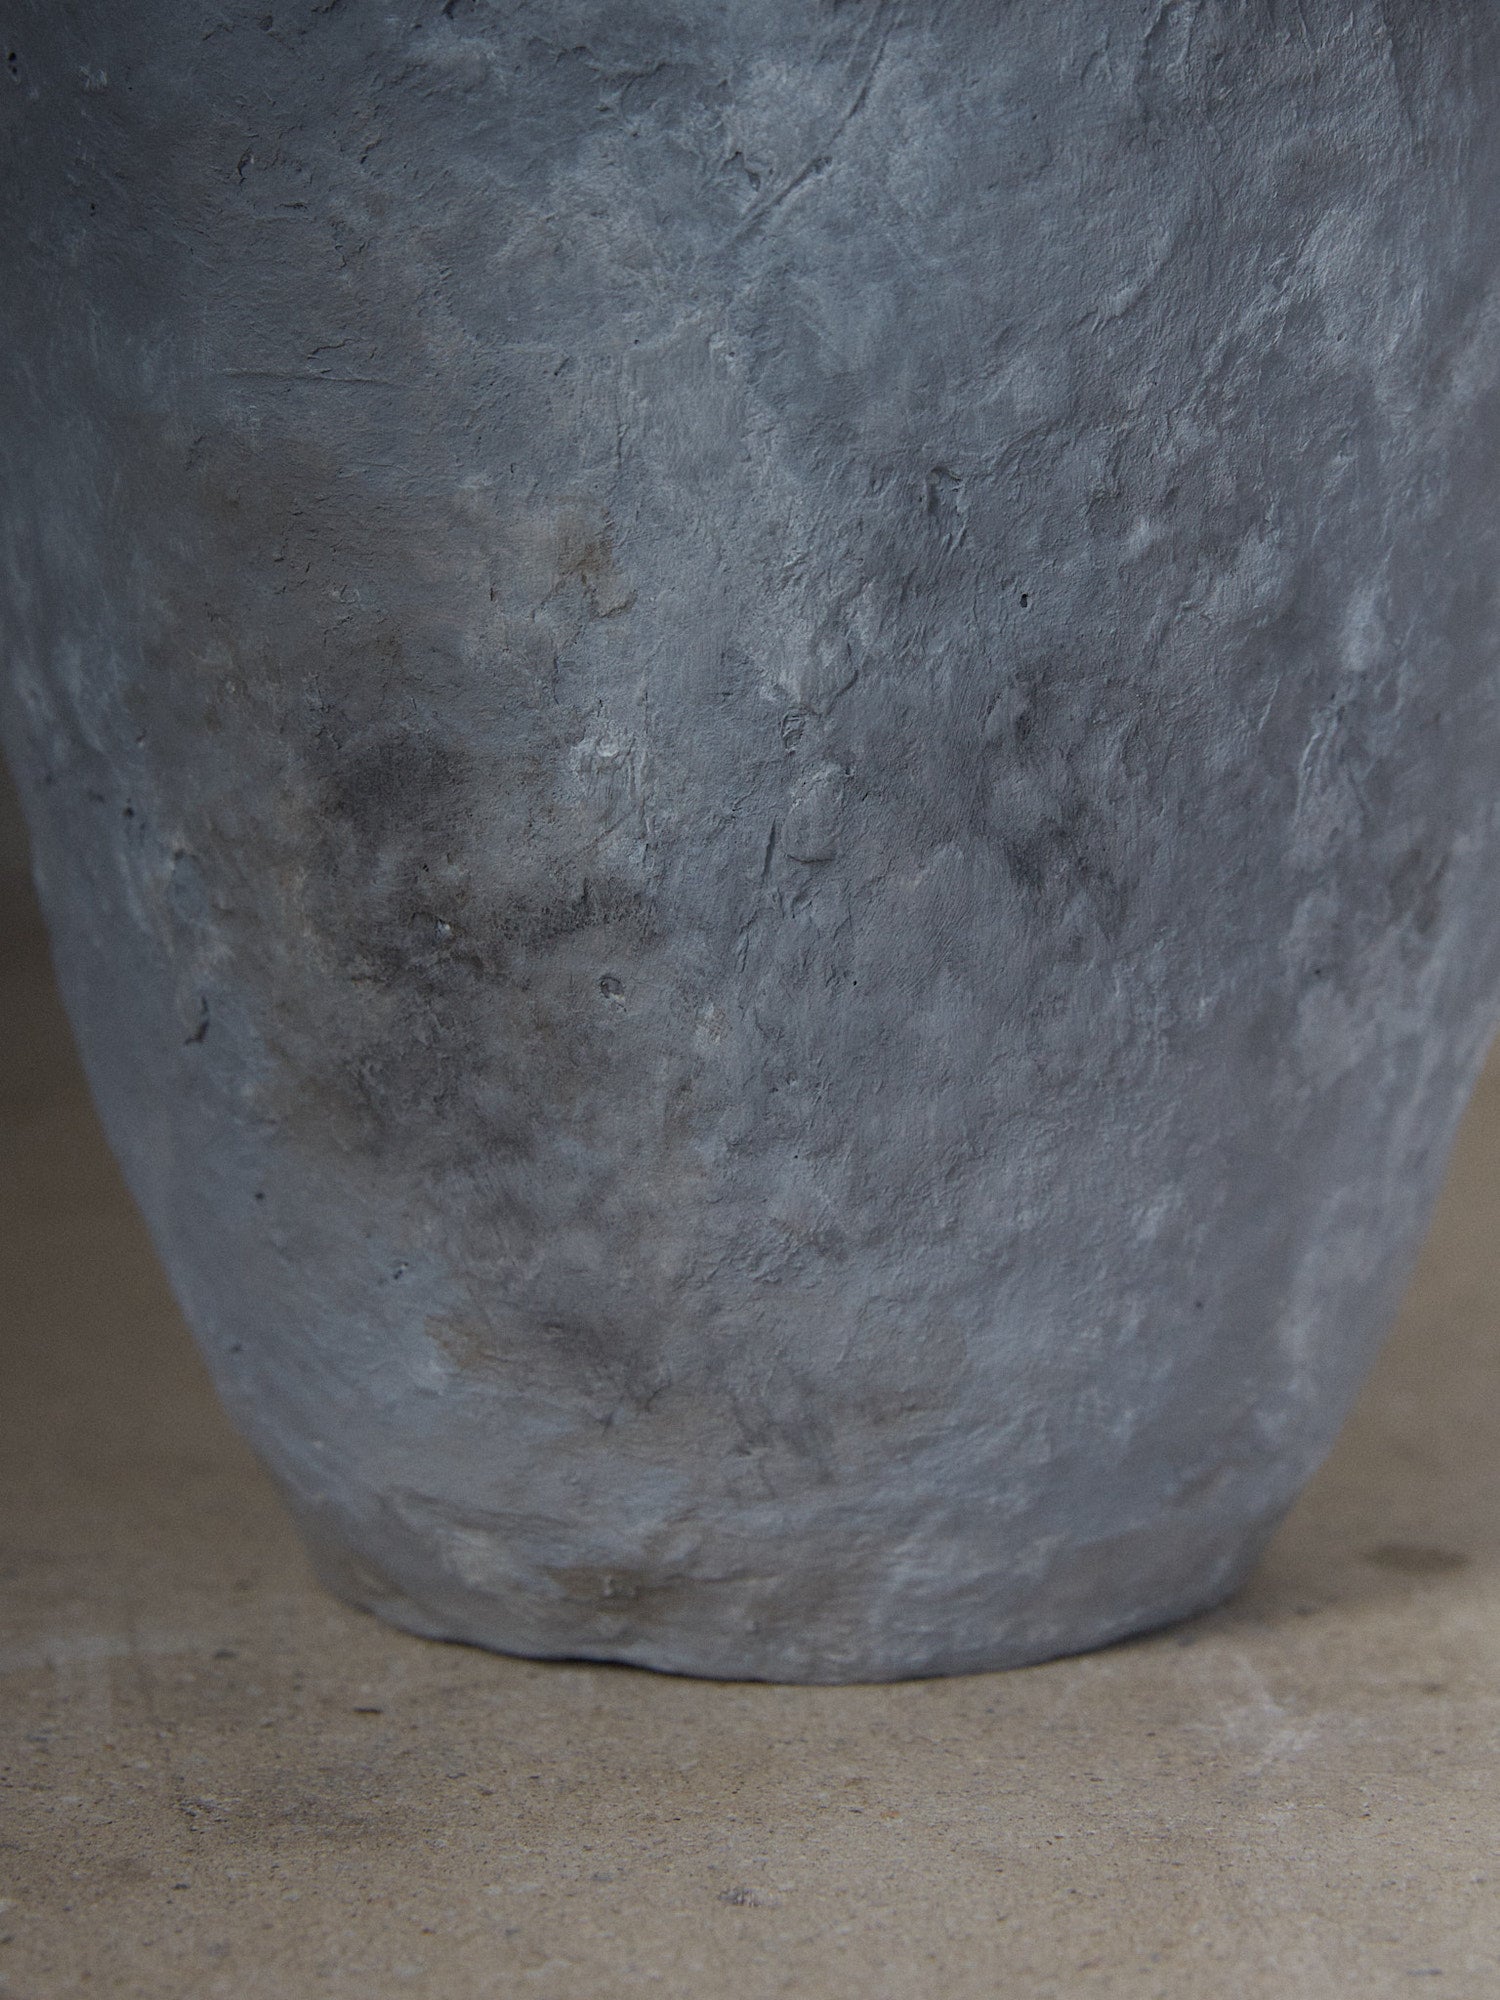 Johanne Vase. Rare find. Hand sculpted, slim footed textural vase in stone grey tones made from sustainable paper maché. 